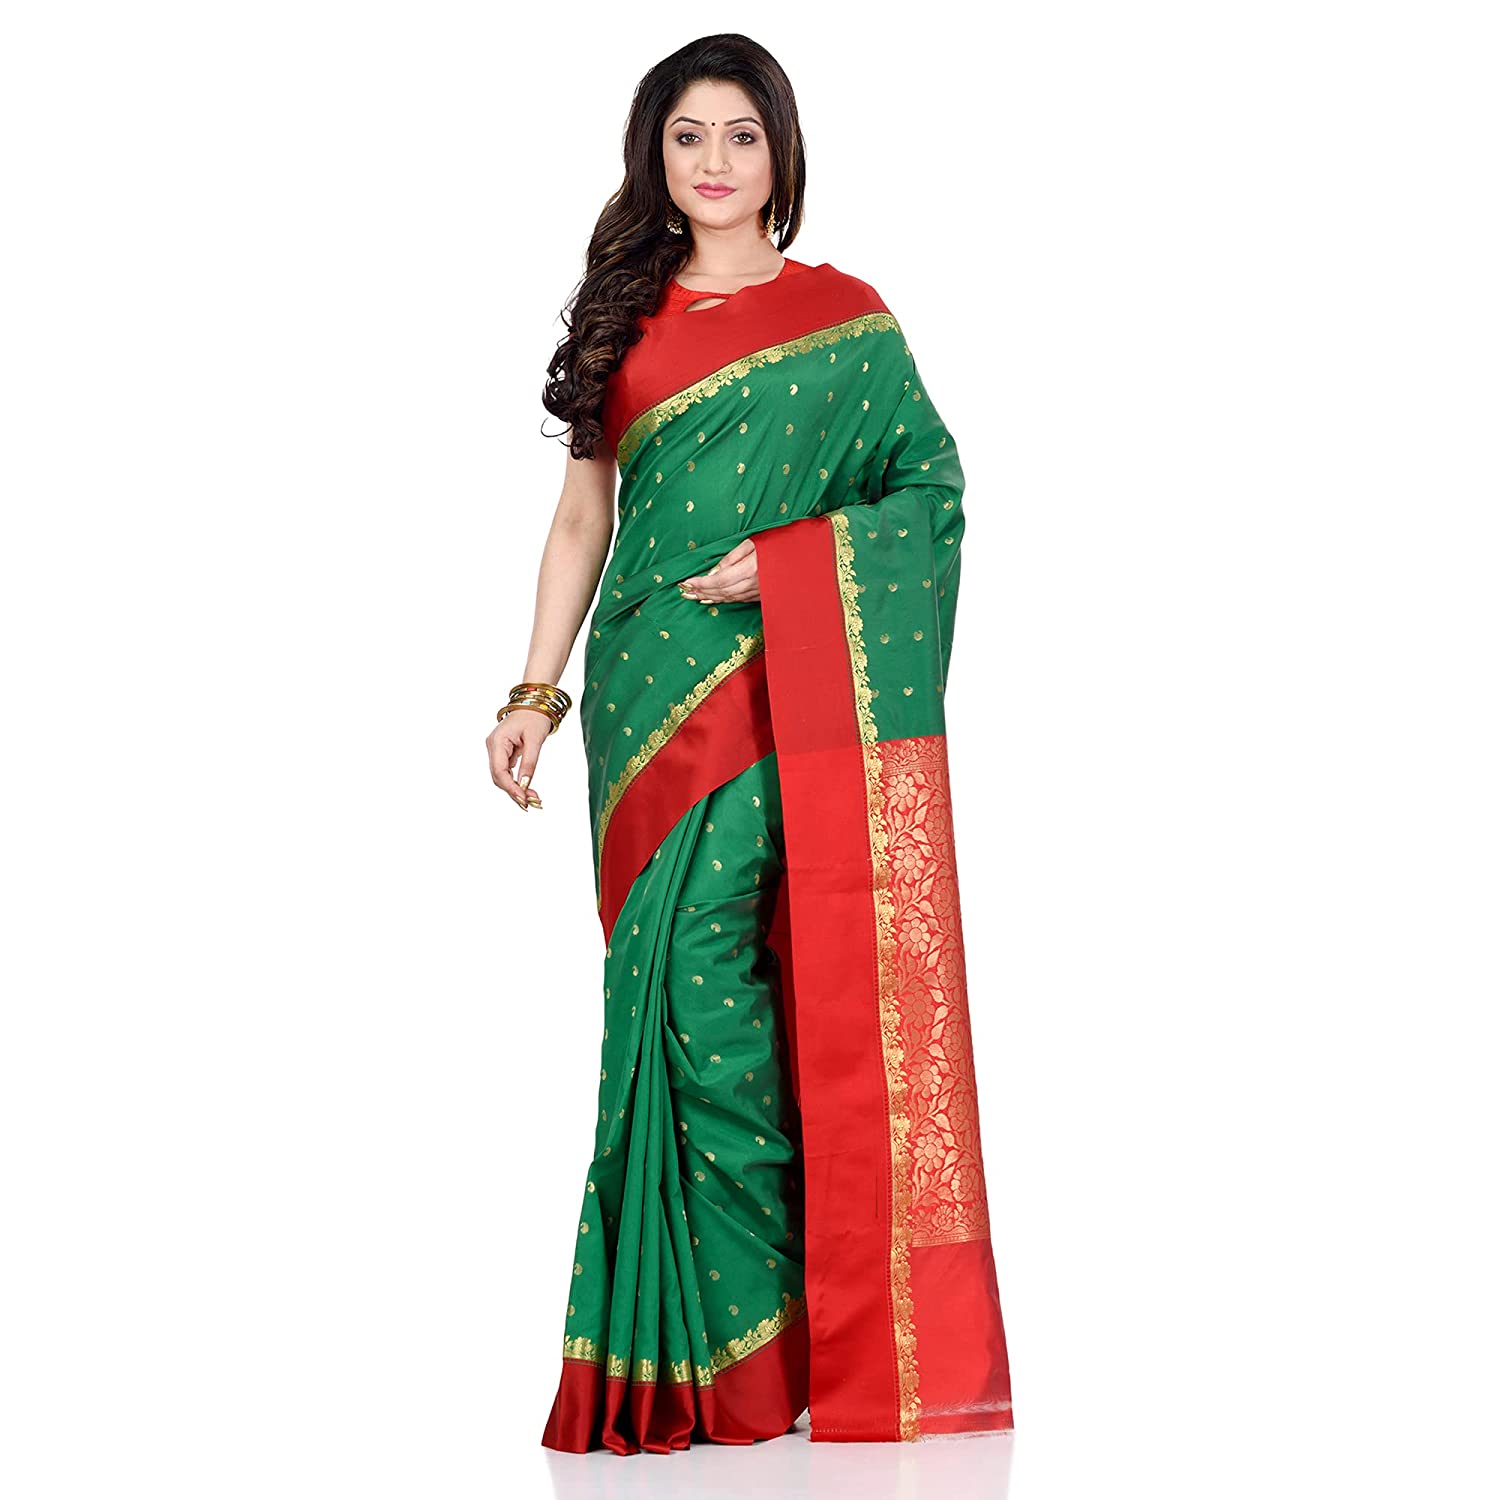 Buy Mayabi Women's Silk Garad Saree of Bengal Tant with Hate Buti Work  without Blouse Pieces - Creamy White and Red at Amazon.in